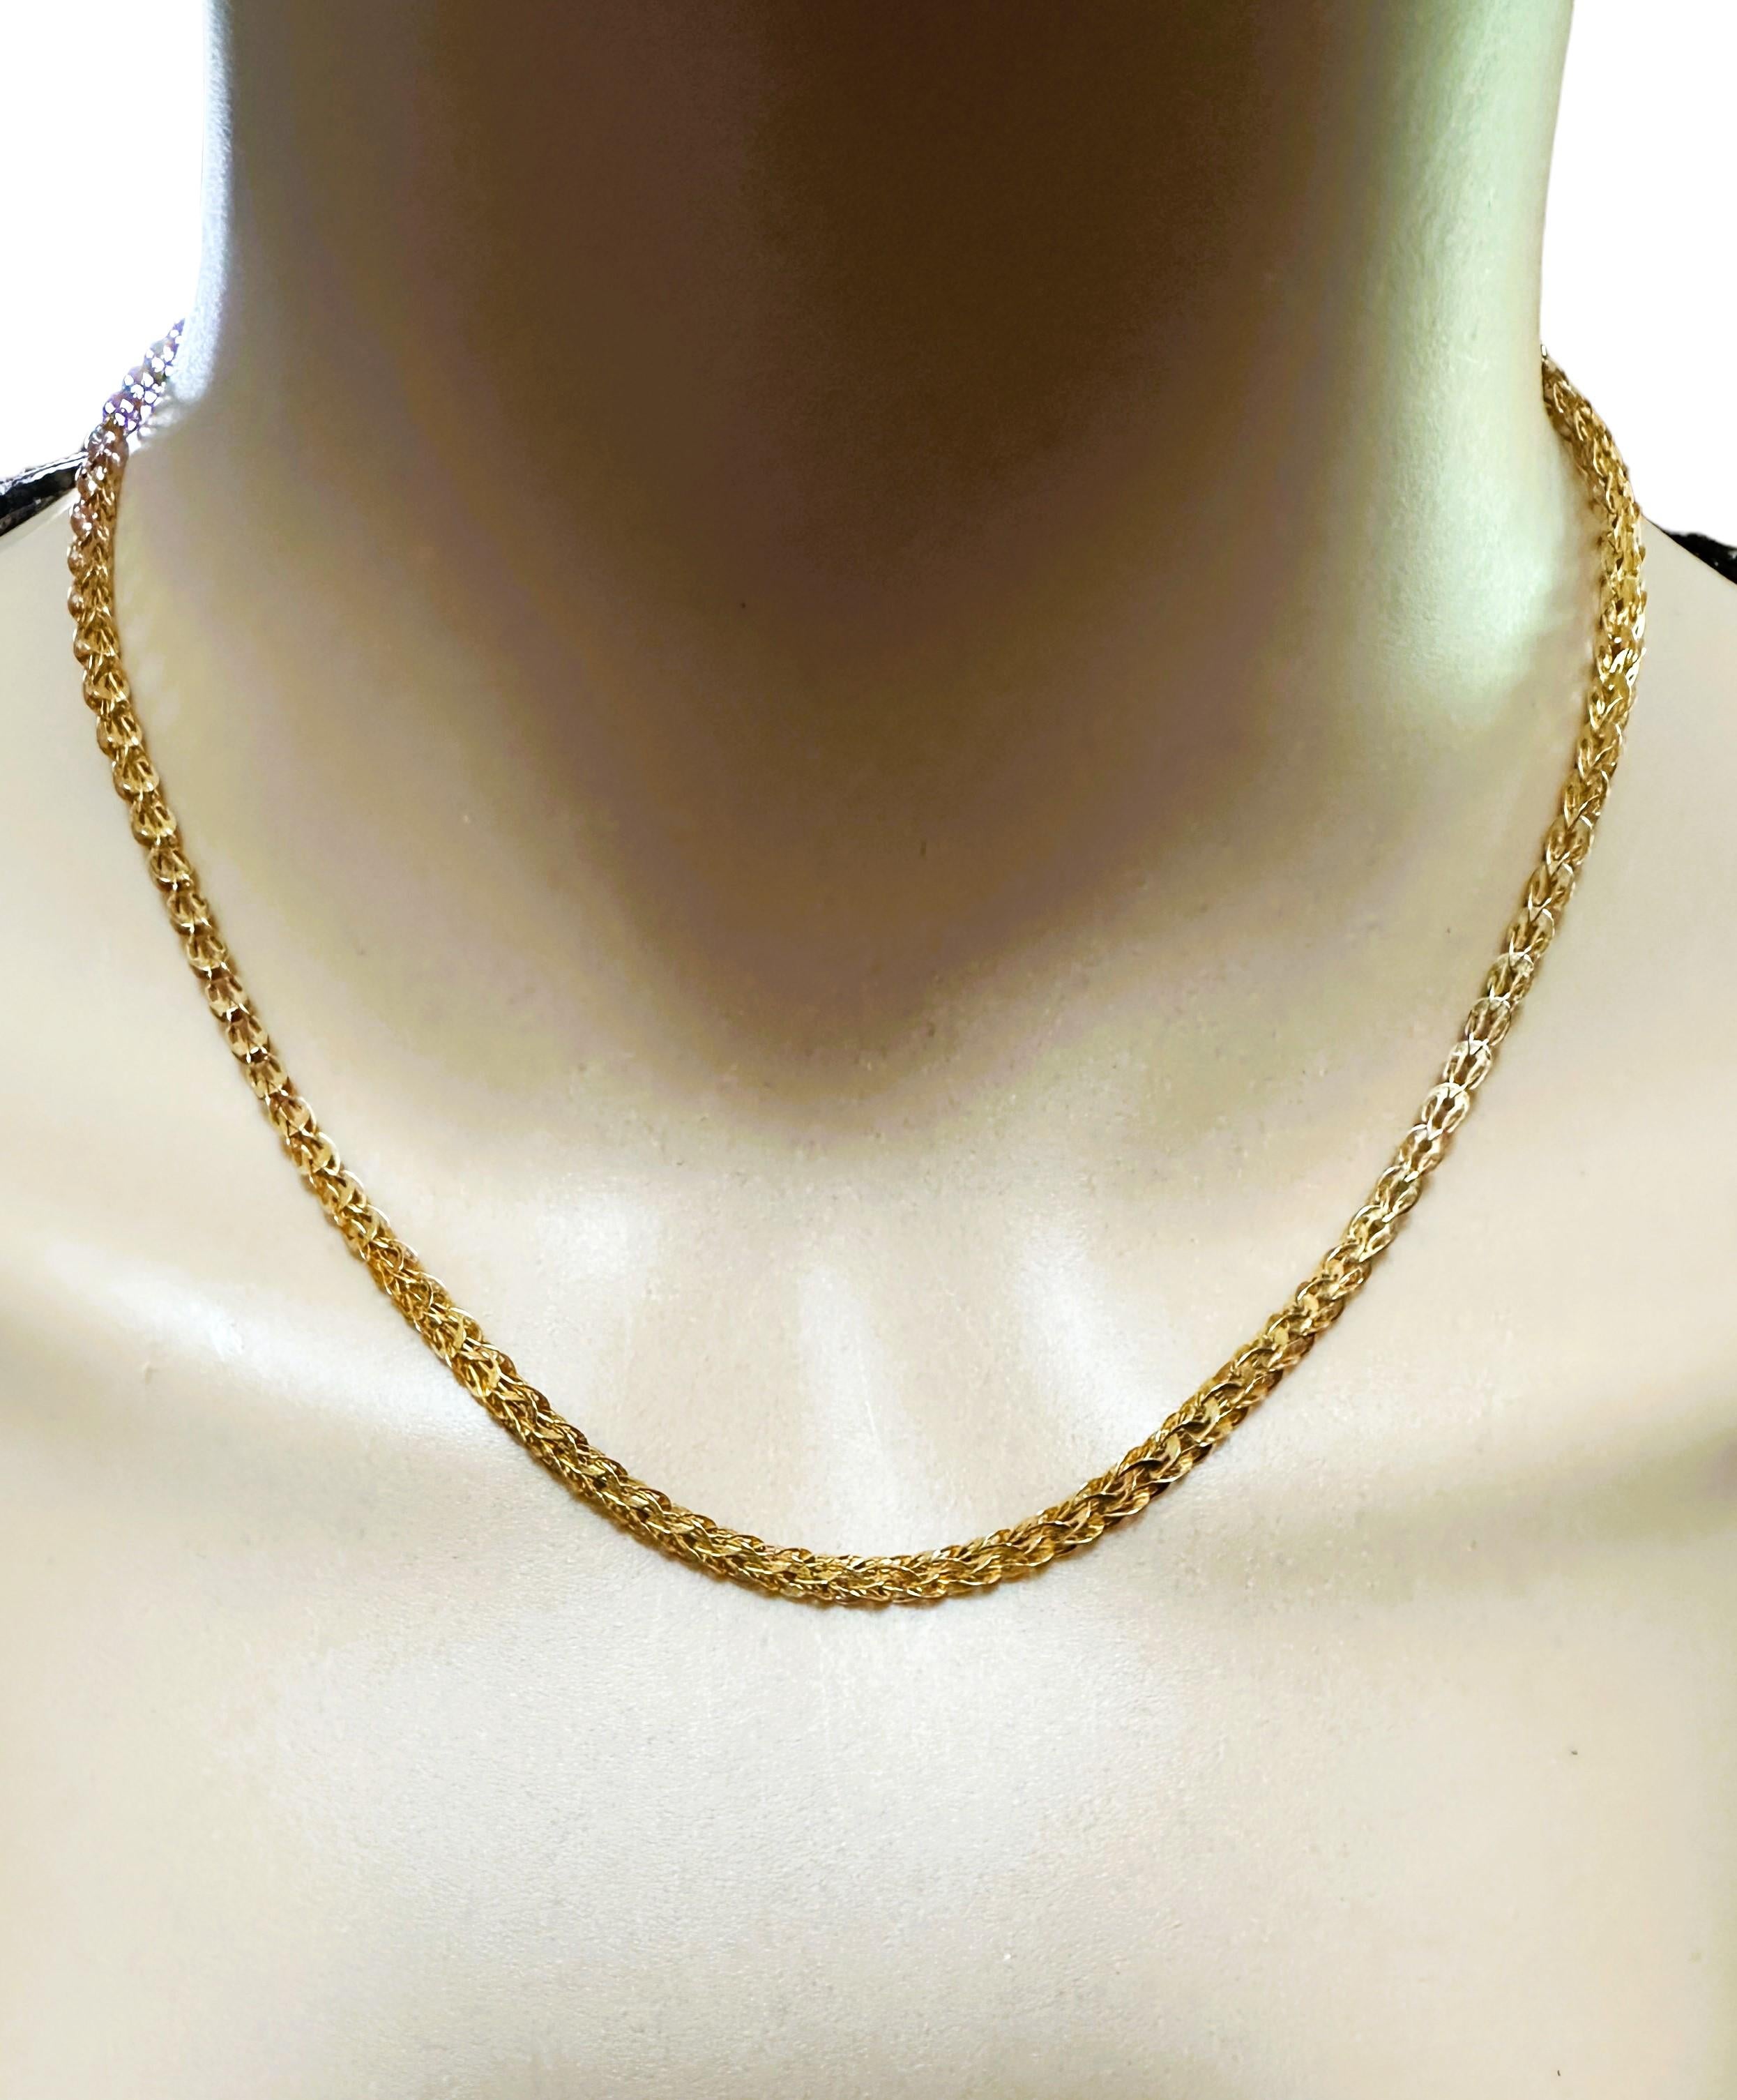 18K Yellow Gold Fancy Link Necklace Chain 16.5 Inches In Excellent Condition For Sale In Eagan, MN